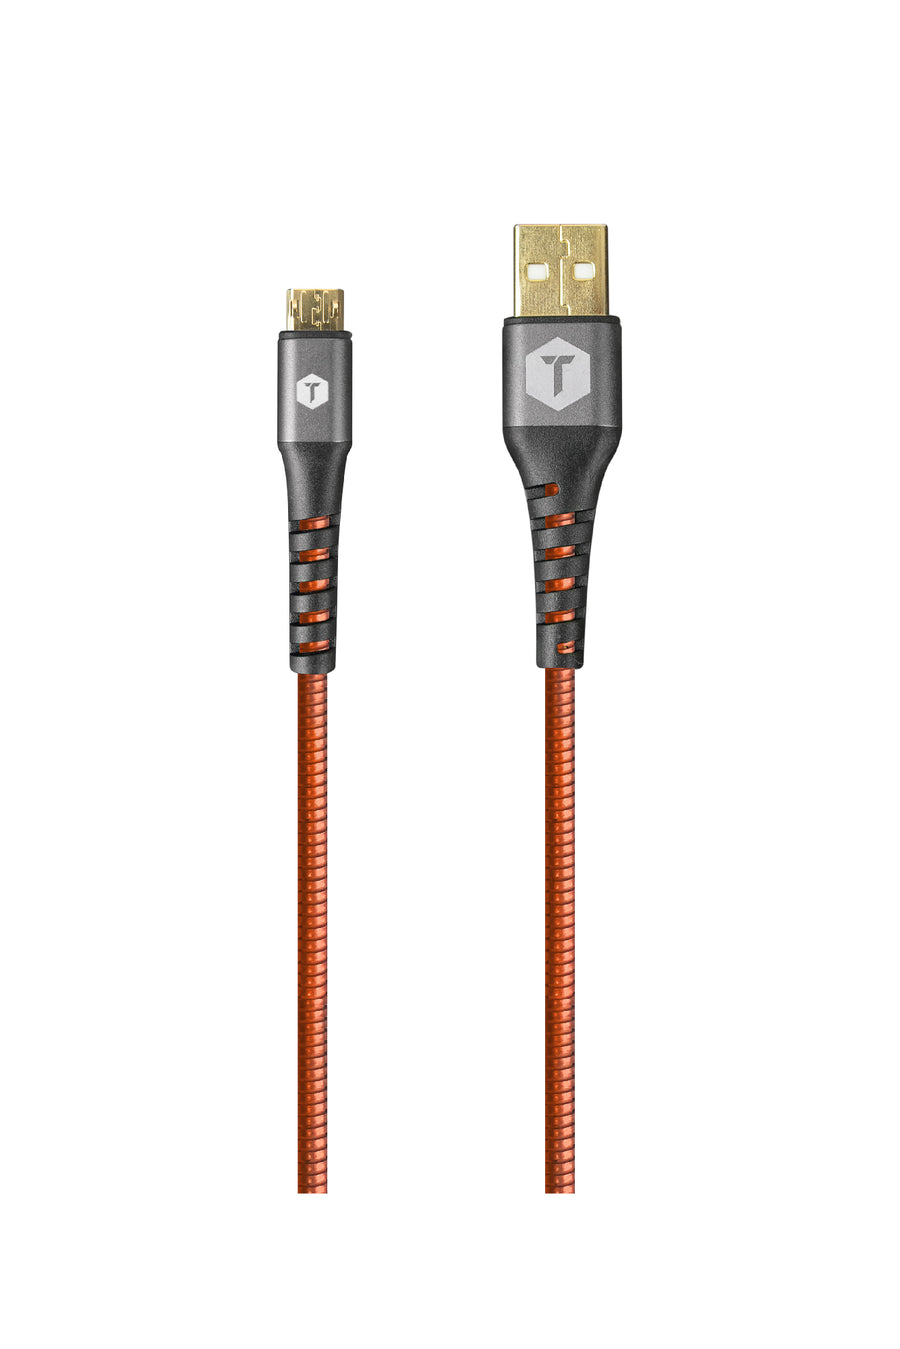 2 Ft. Armor-Flex Micro USB to A Cable